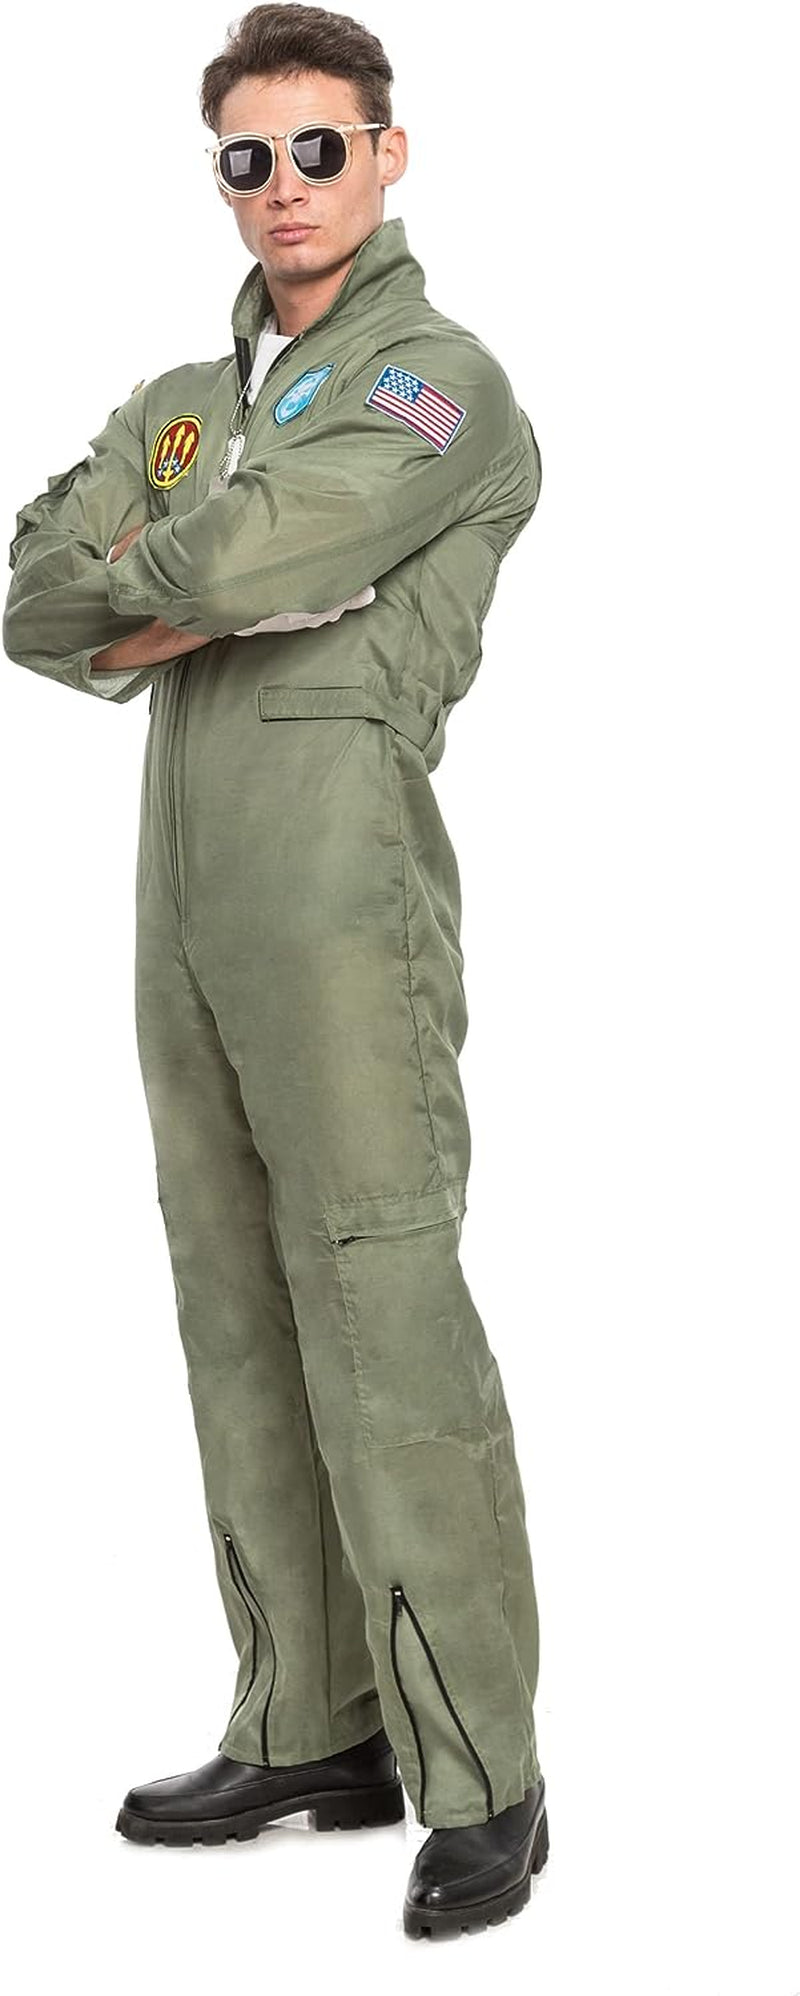 Spooktacular Creations Men’S Flight Pilot Adult Costume with Accessory for Halloween Party